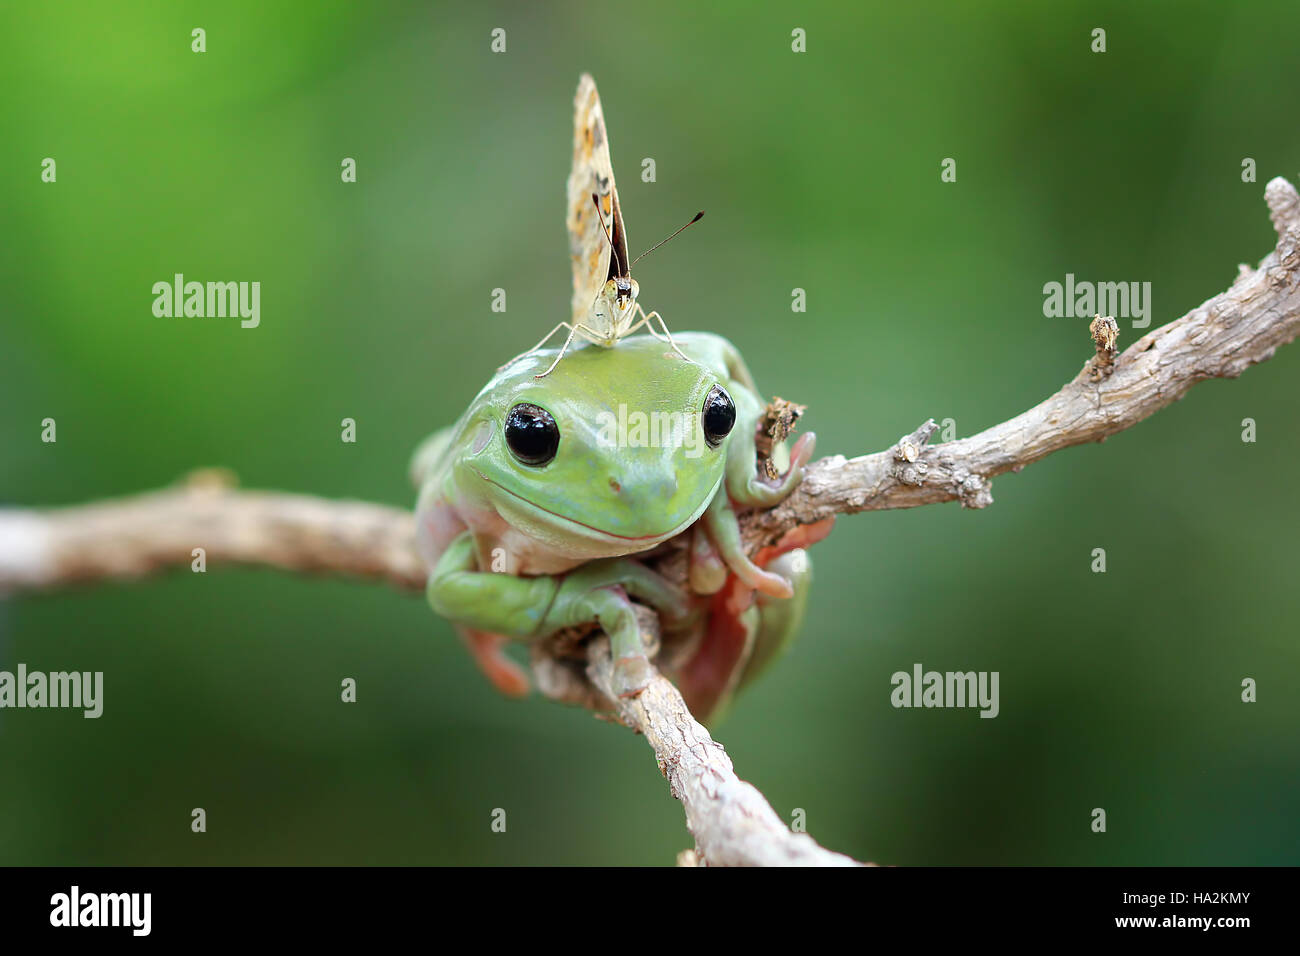 Butterfly sitting on a dumpy tree frog, Indonesia Stock Photo